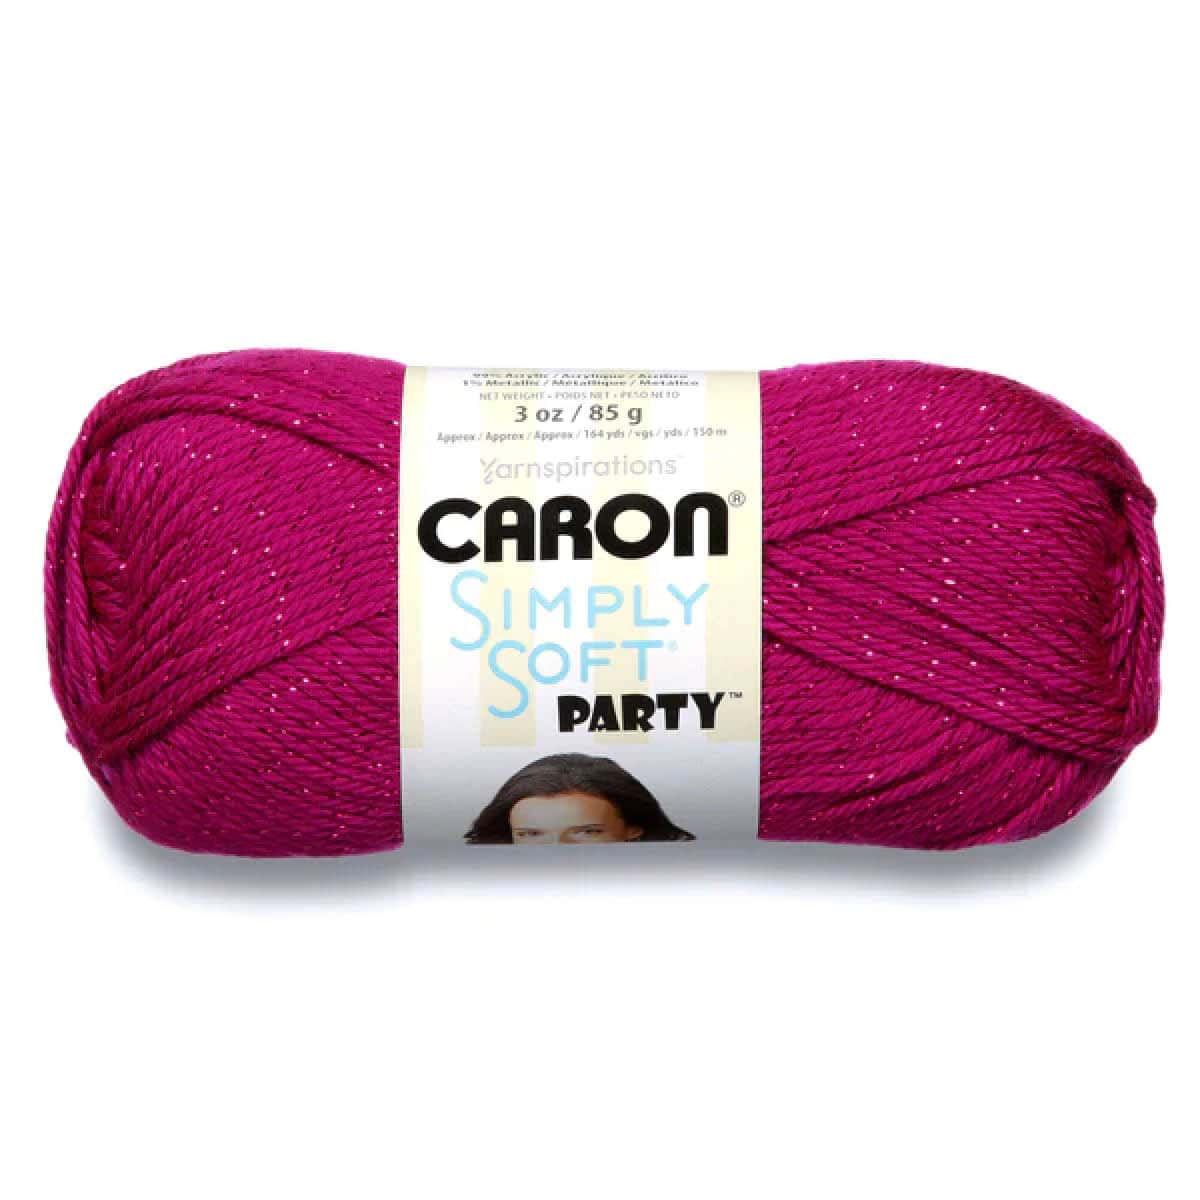 Caron Simply Soft Party Yarn Product